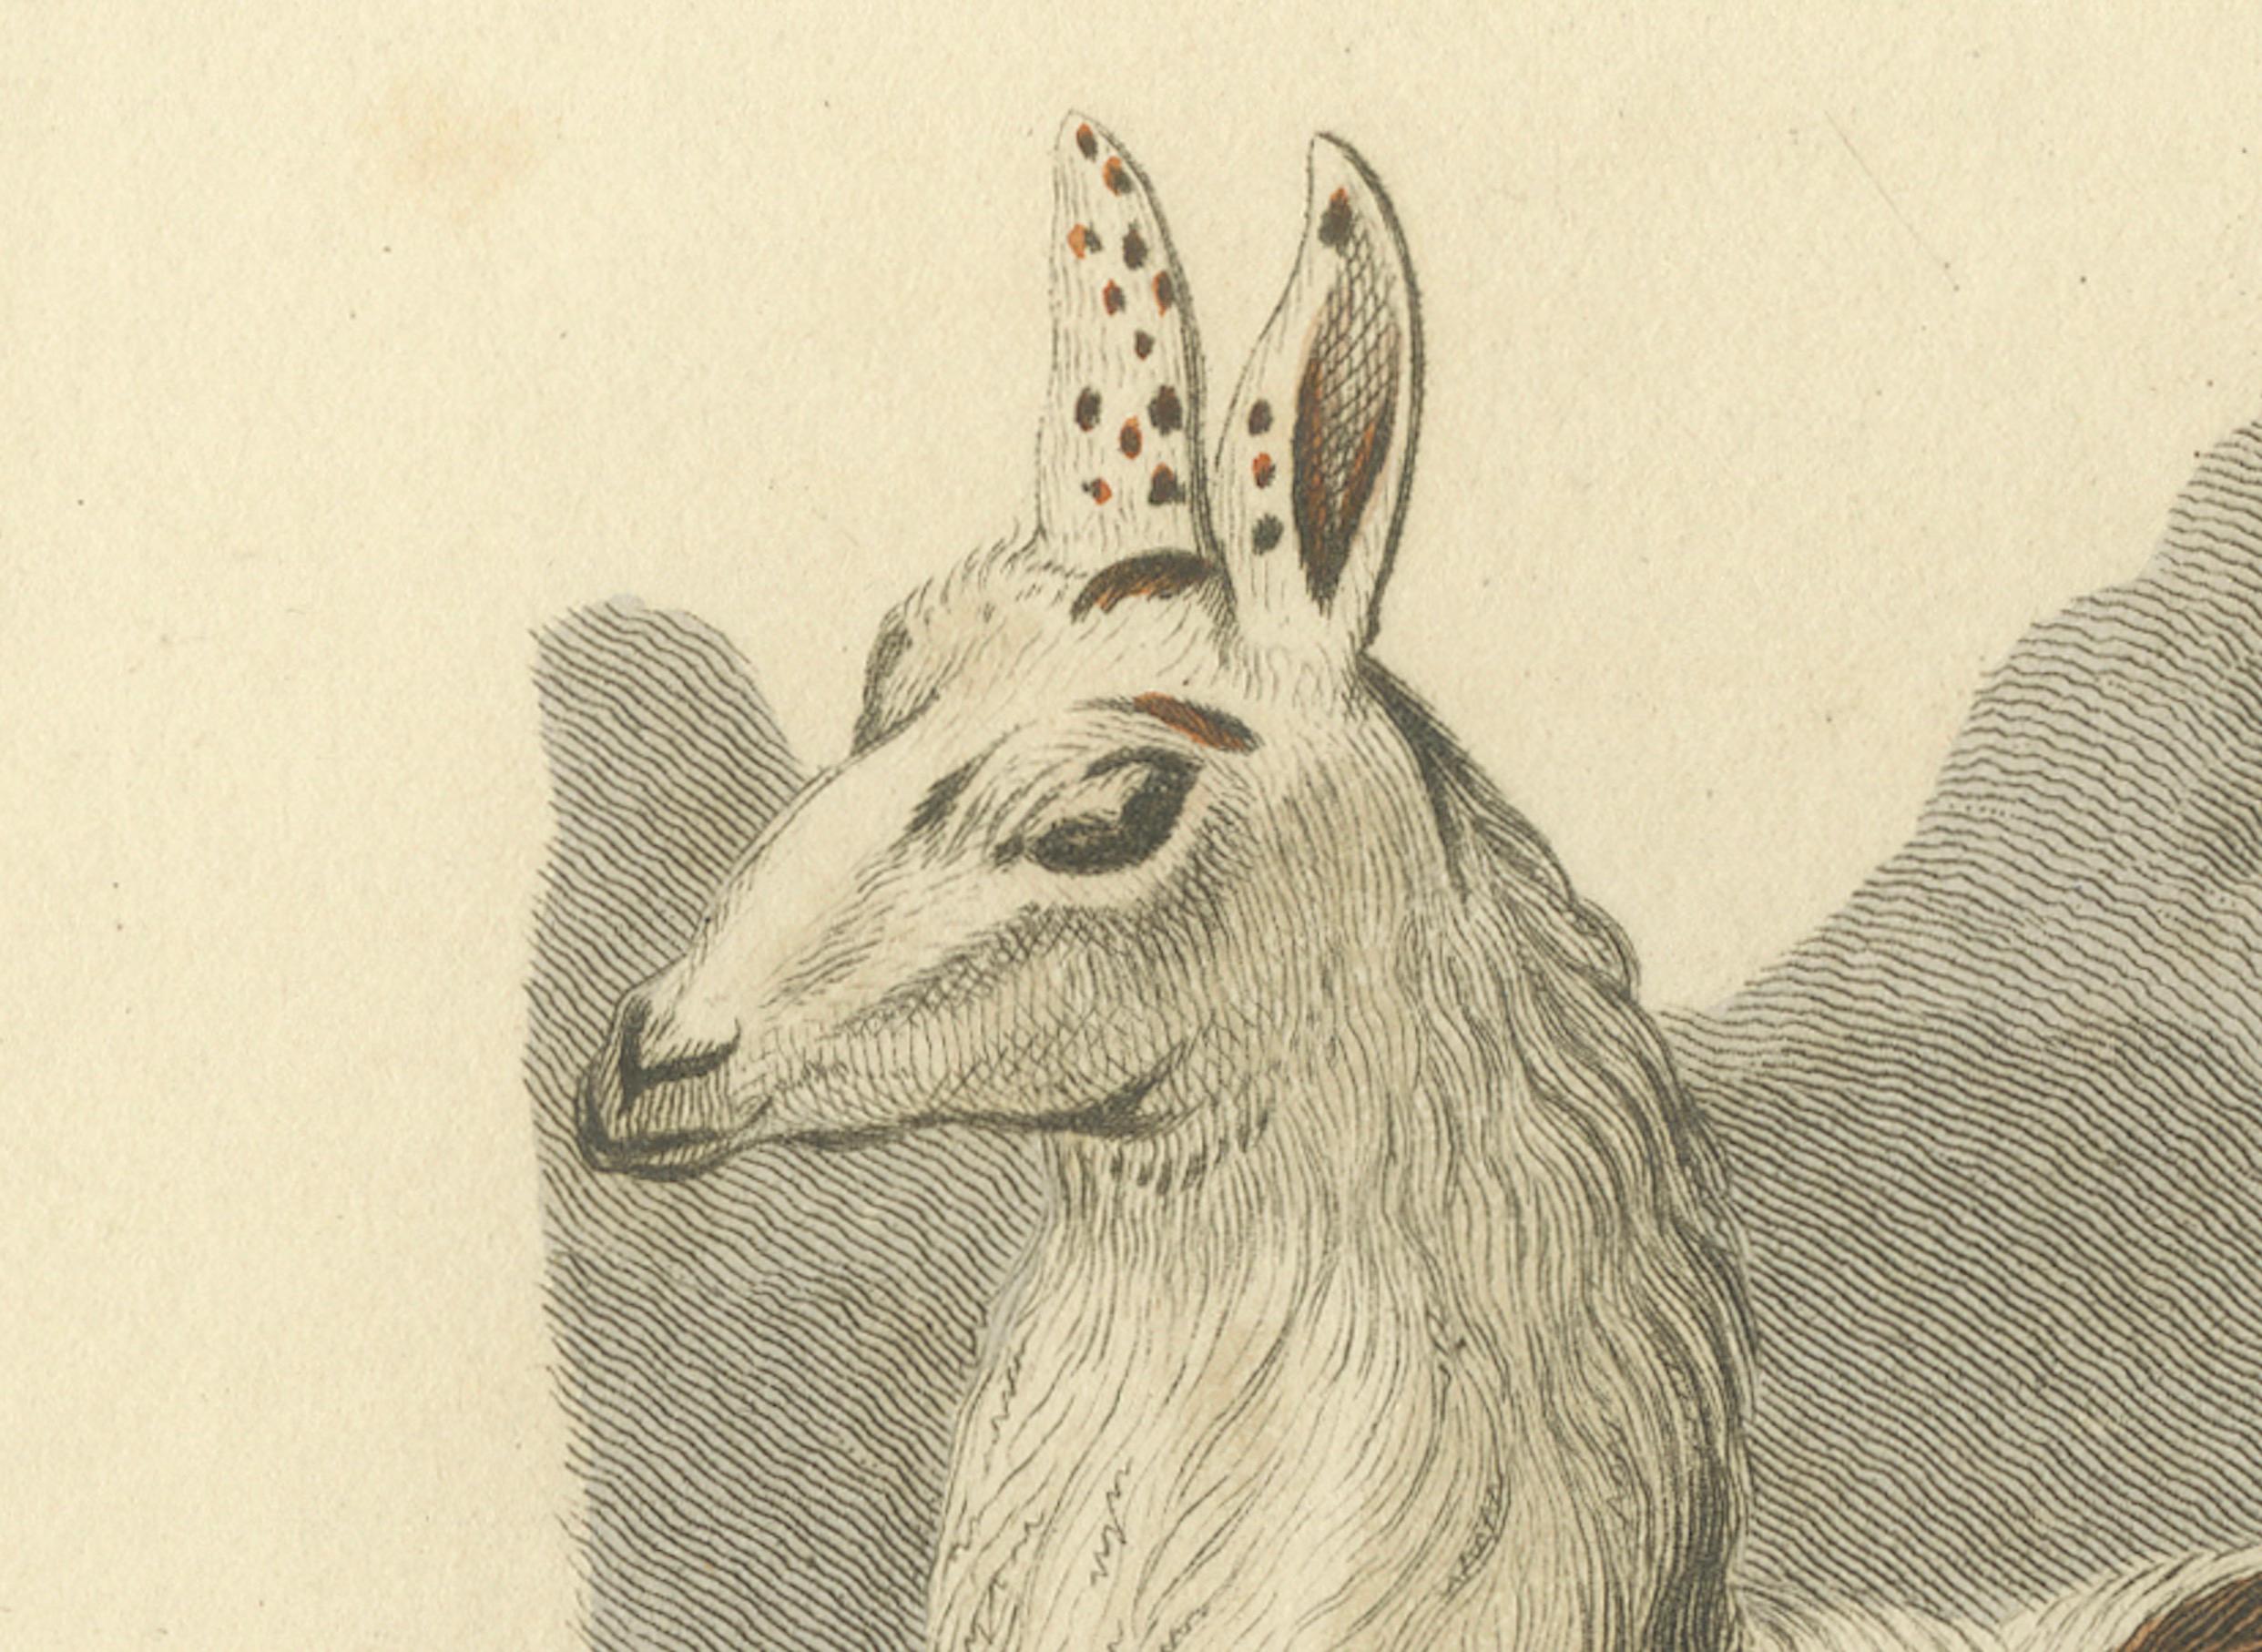 The print titled 'The Alpocos' is a historical depiction of an alpaca, created by the artist Charles Hamilton Smith. It was published by G.B. Whittaker around 1824, and consistent with the time when European audiences were becoming increasingly